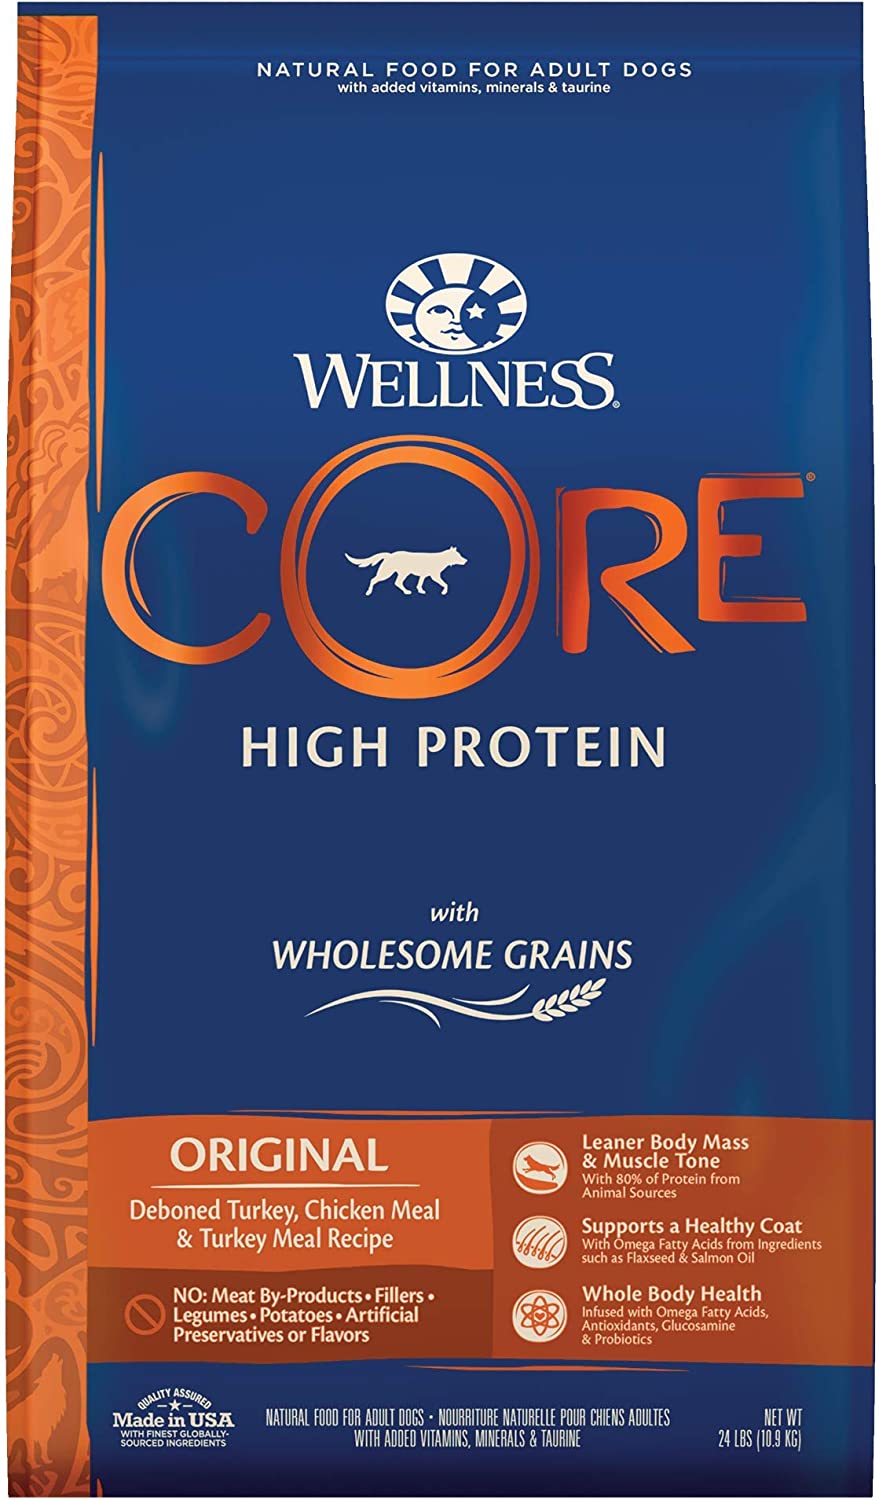 New Chewy Customers: Wellness CORE Dog Foods: 24-lbs Wholesome Grain (Original) $16.50, 24-Ct Grain-Free Weight management Formula Canned Foods $29.95 & More w/ Autoship & Save